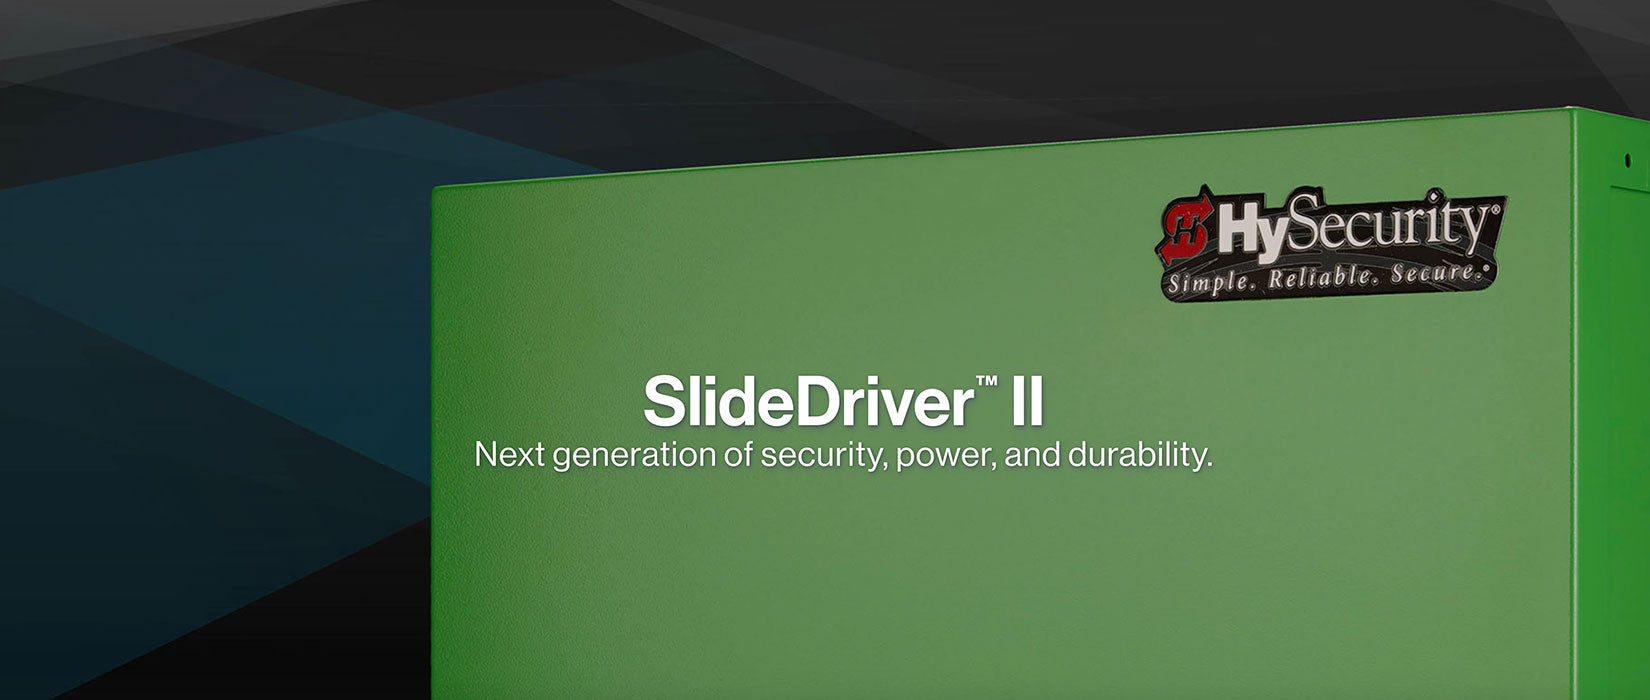 HySecurity SlideDriver II - Next Generation of Security | All Security Equipment